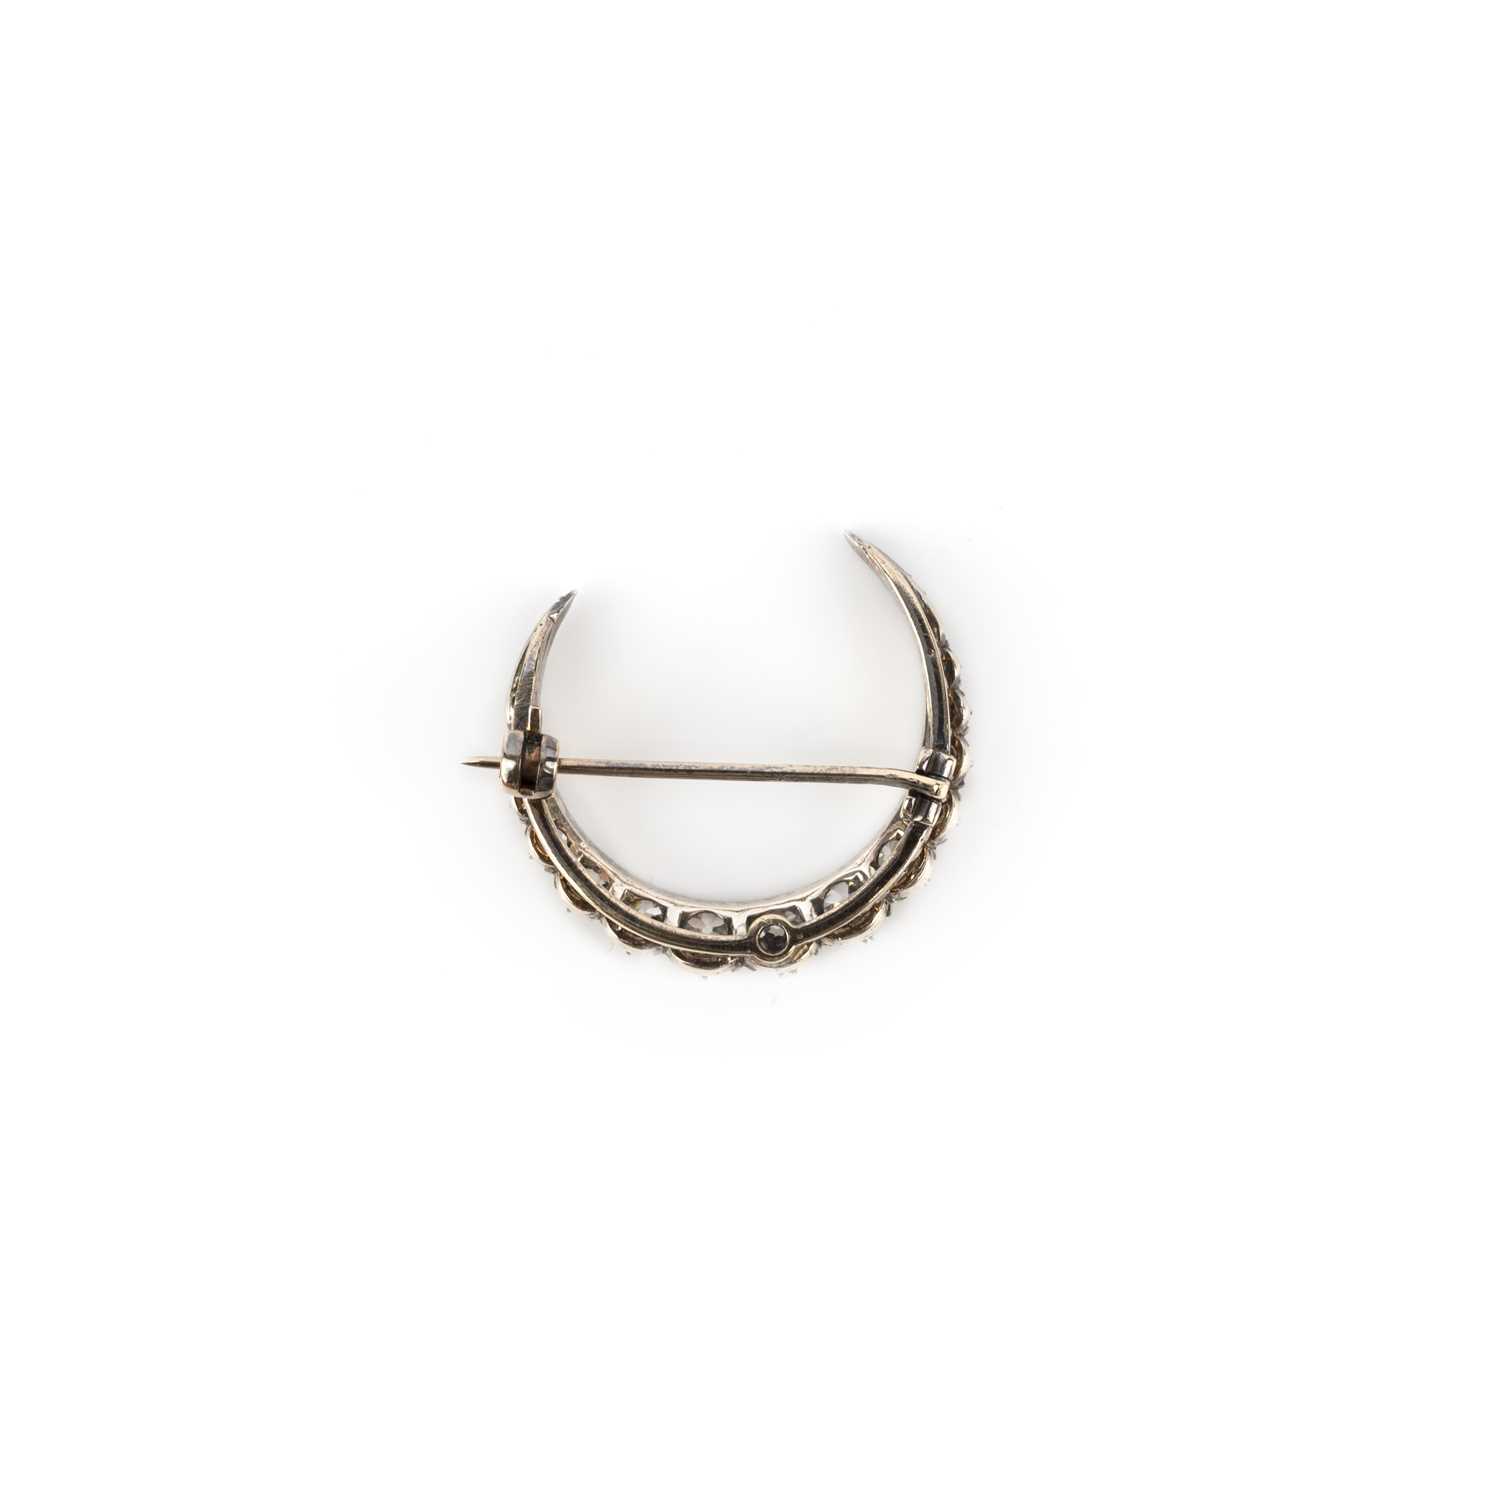 A Victorian diamond brooch, late 19th century, designed as a crescent moon, set with circular-cut - Image 2 of 2